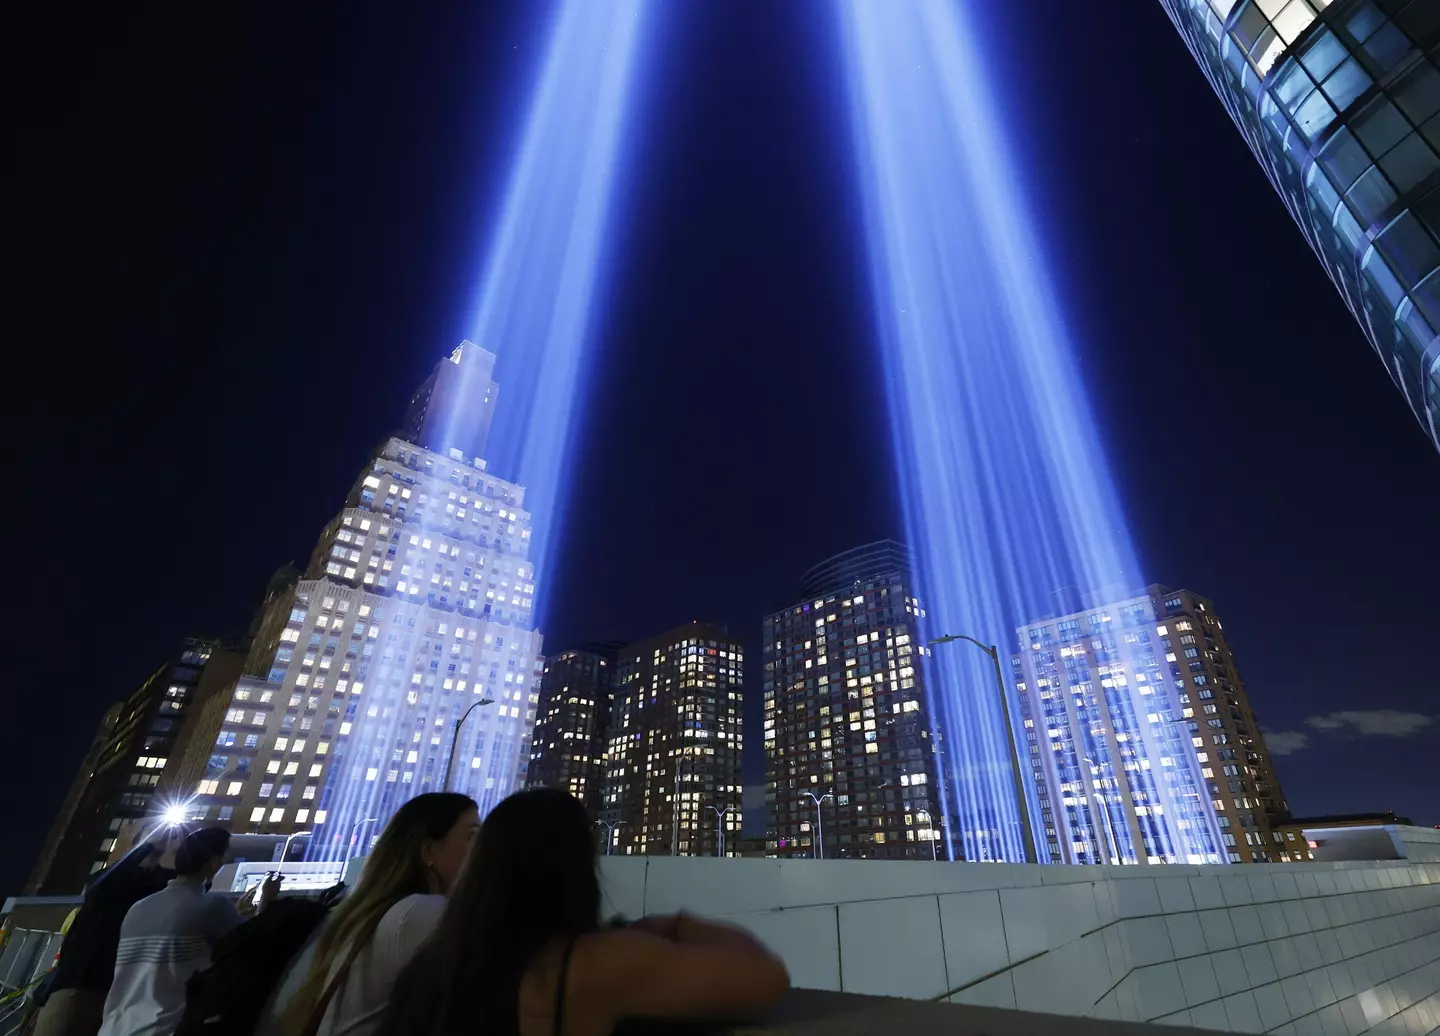 The Twin Towers Tribute In Light art installation shines in Lower Manhattan near One World Trade Center.